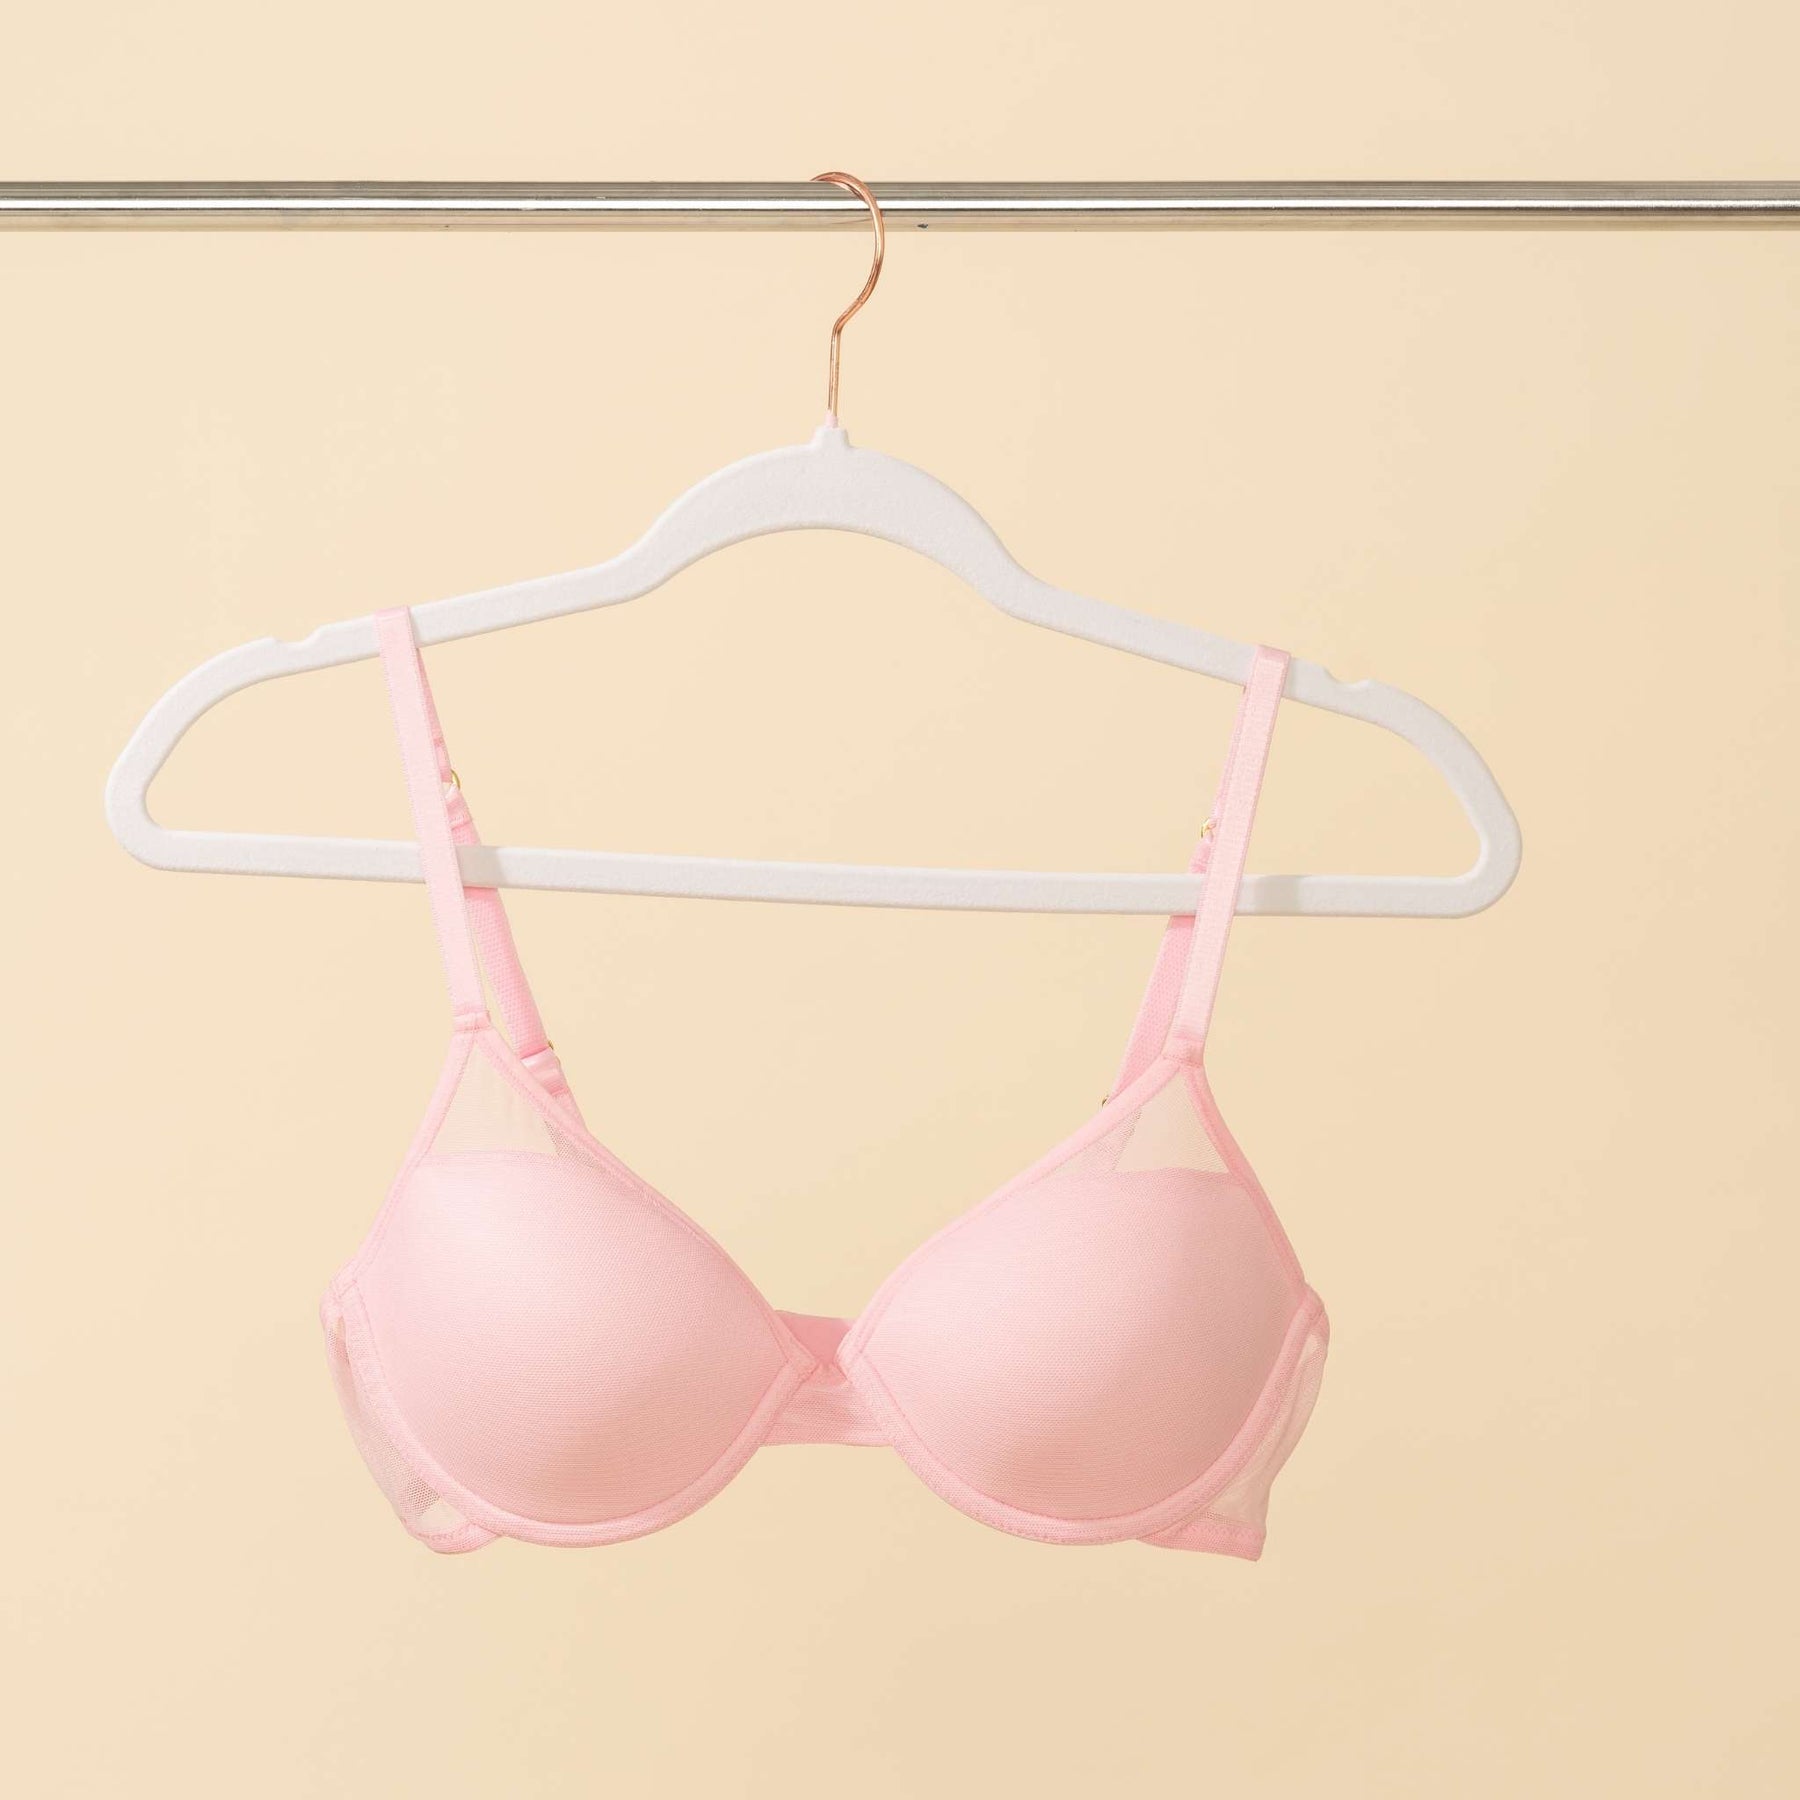 32C Bras: Bra Cup Size for 32C Boobs and Breast Size Étiqueté